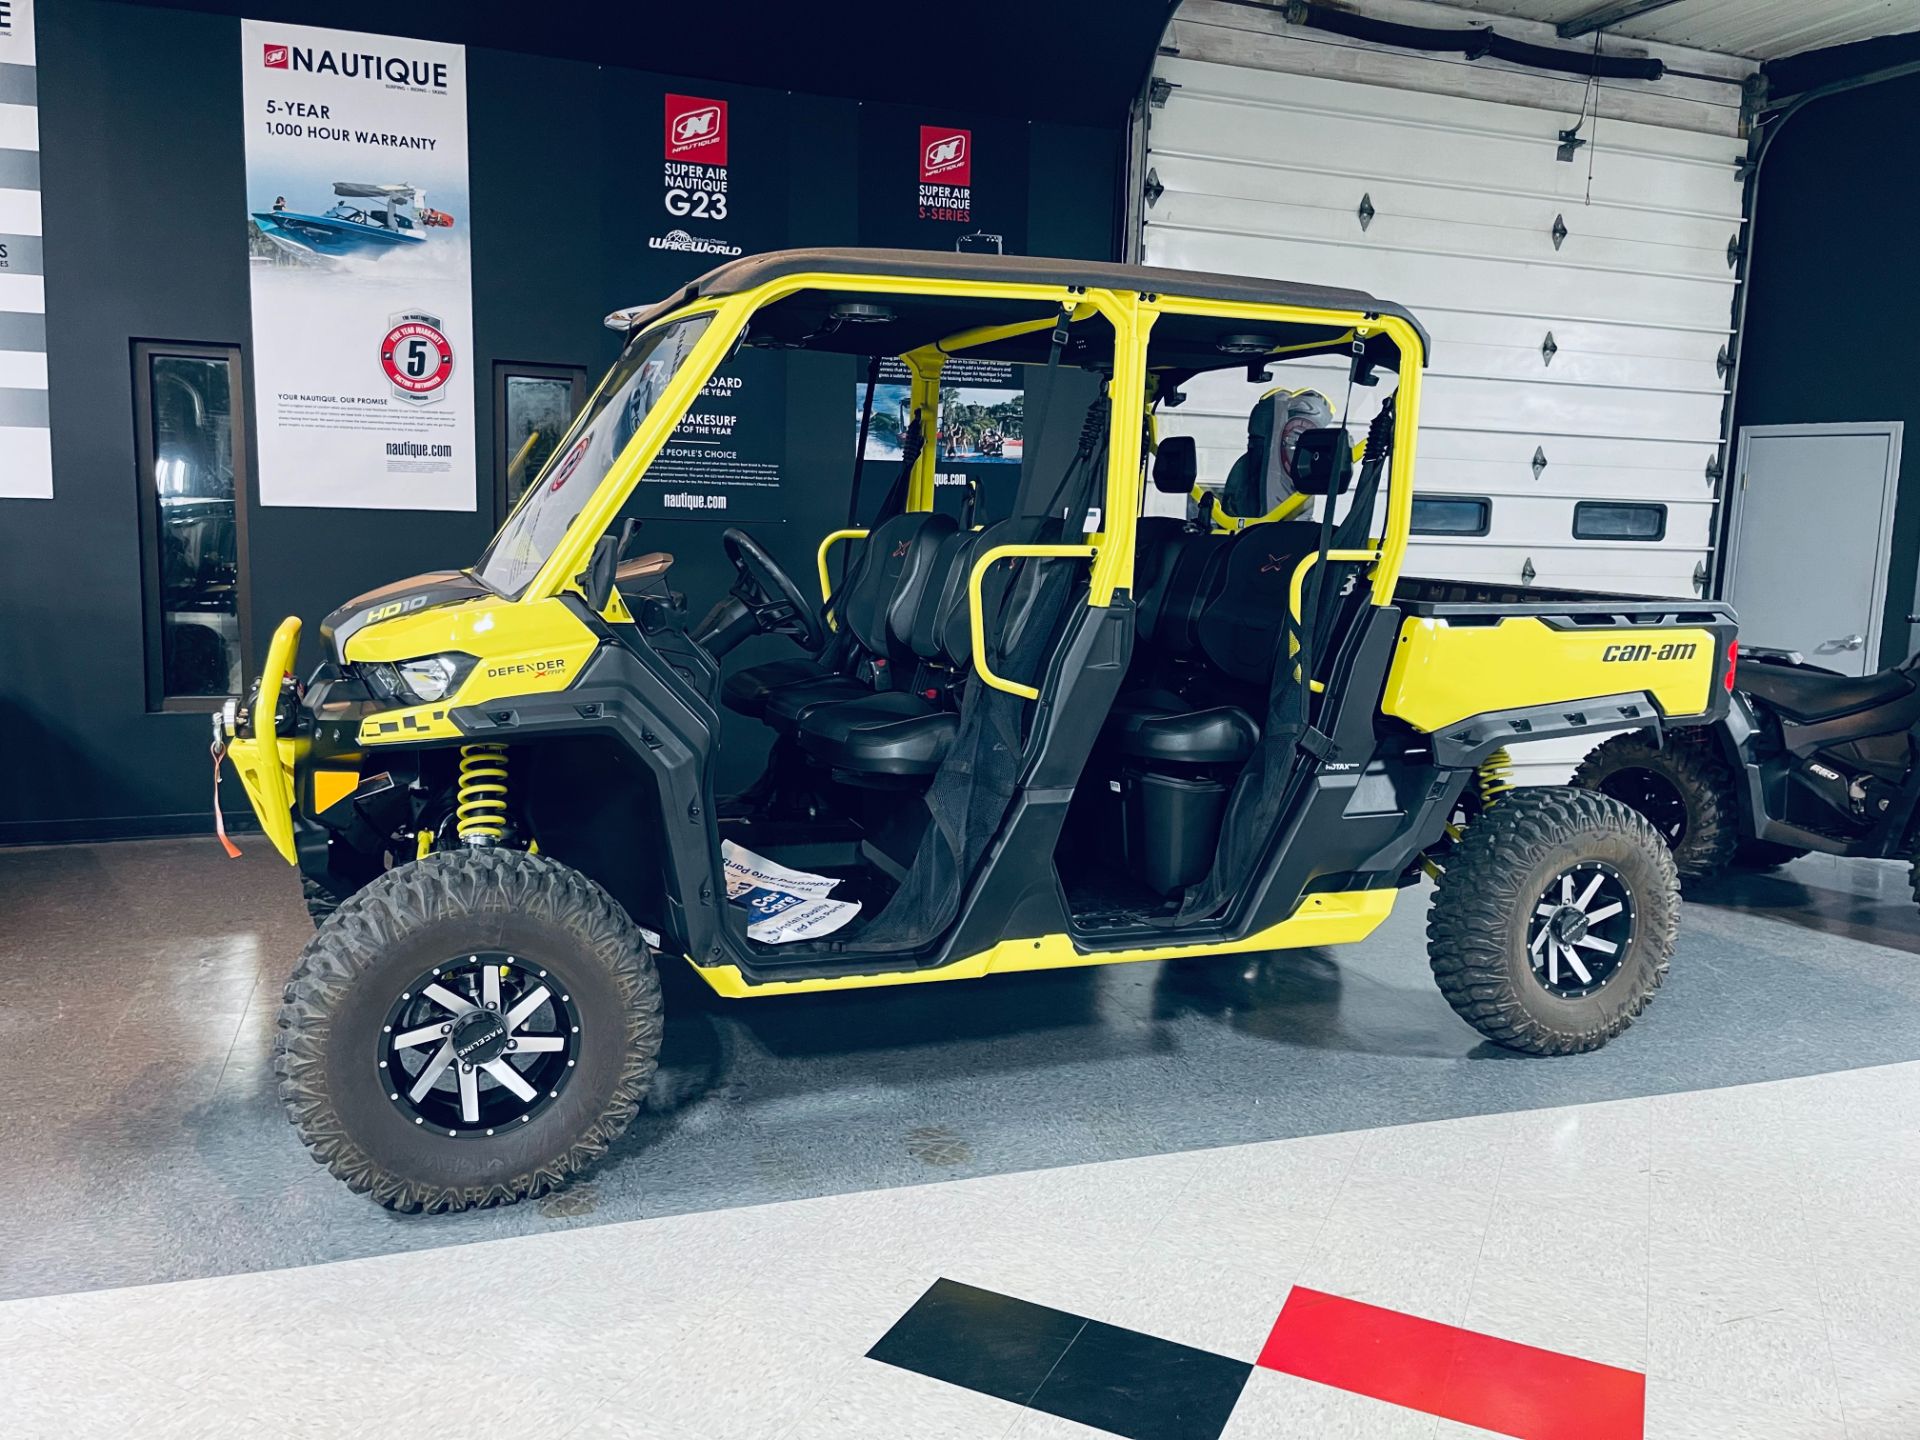 2019 Can-Am Defender Max X mr HD10 in Wilmington, Illinois - Photo 1